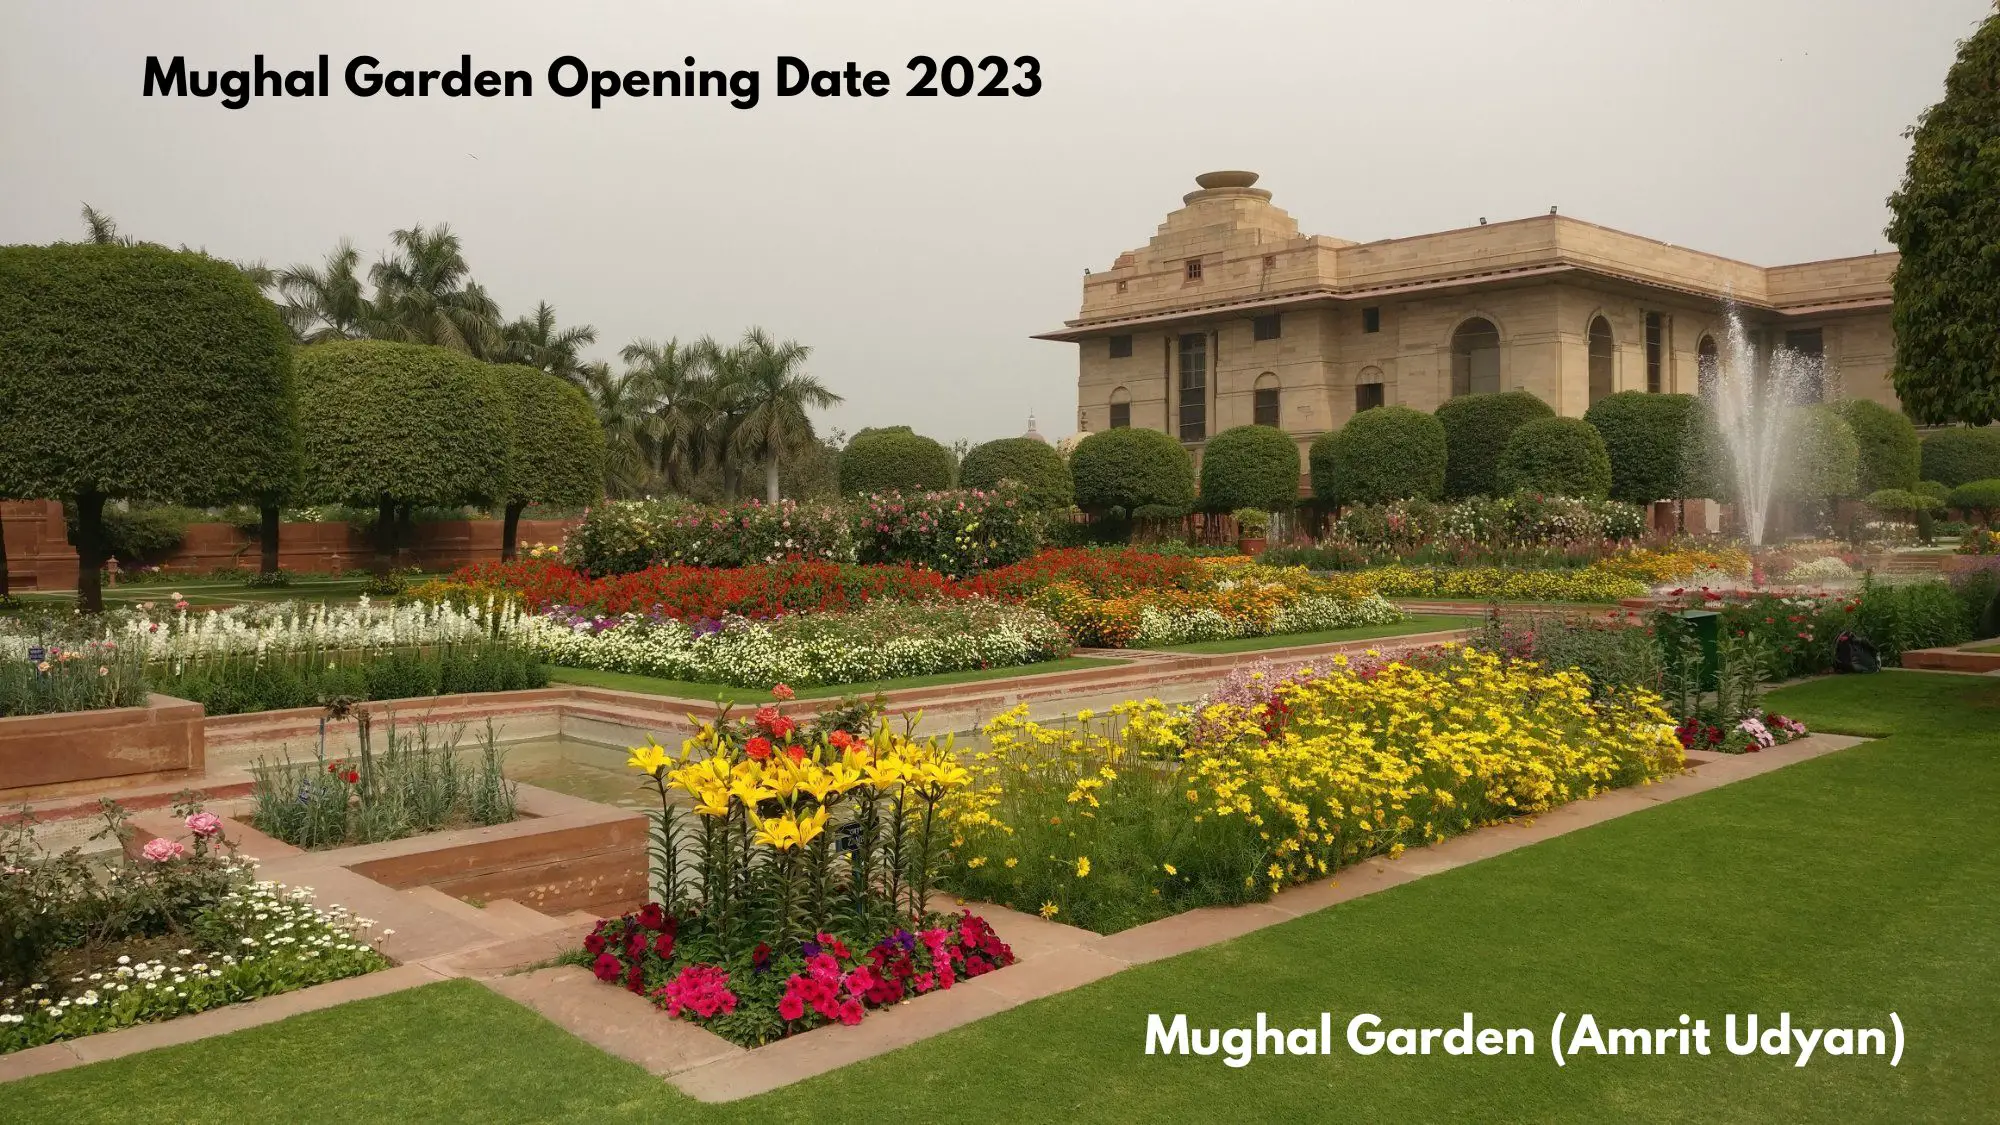 Mughal Garden Opening Date 2023 Entry Fee, Ticket Booking, Ticket